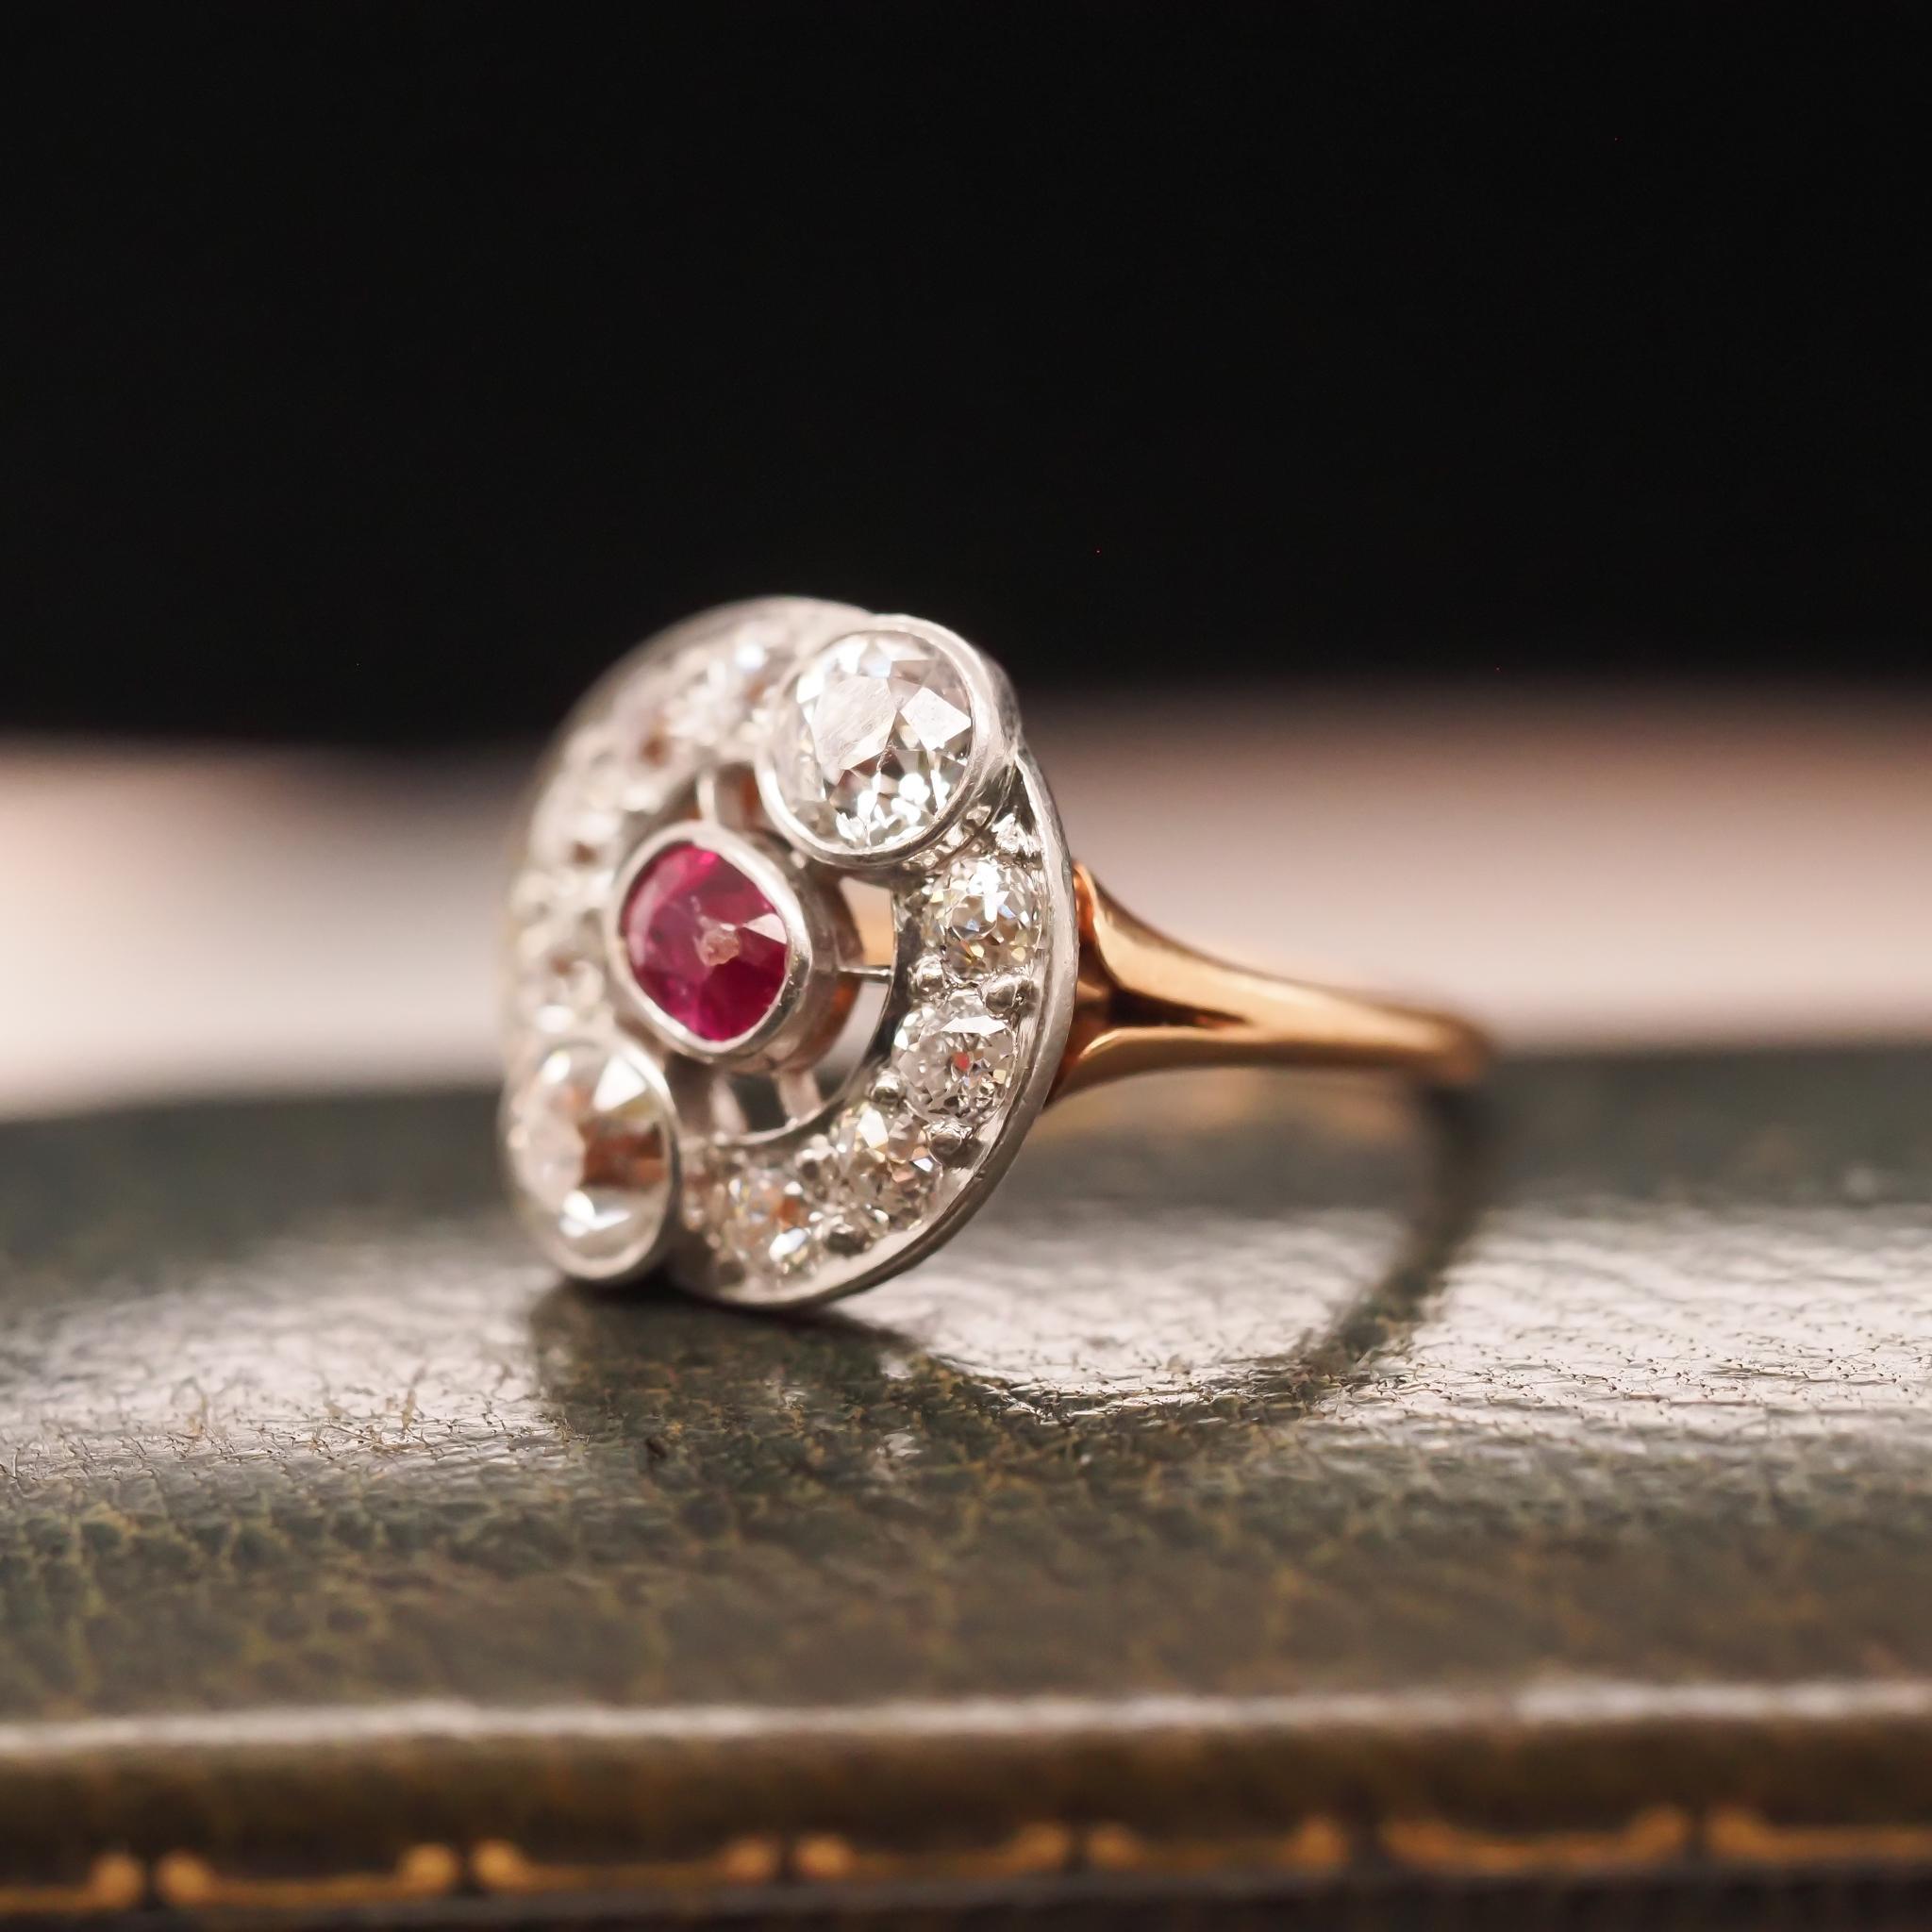 Year: 1900s
Item Details:
Ring Size: 4.5 (Sizable)
Metal Type: 14K Yellow Gold and Platinum Top [Hallmarked, and Tested]
Weight: 4.5 grams
Ruby Details: .35ct, Natural, Red, Unheated, Elongated Antique Cushion Shape.
Diamond Details: 2 Old European